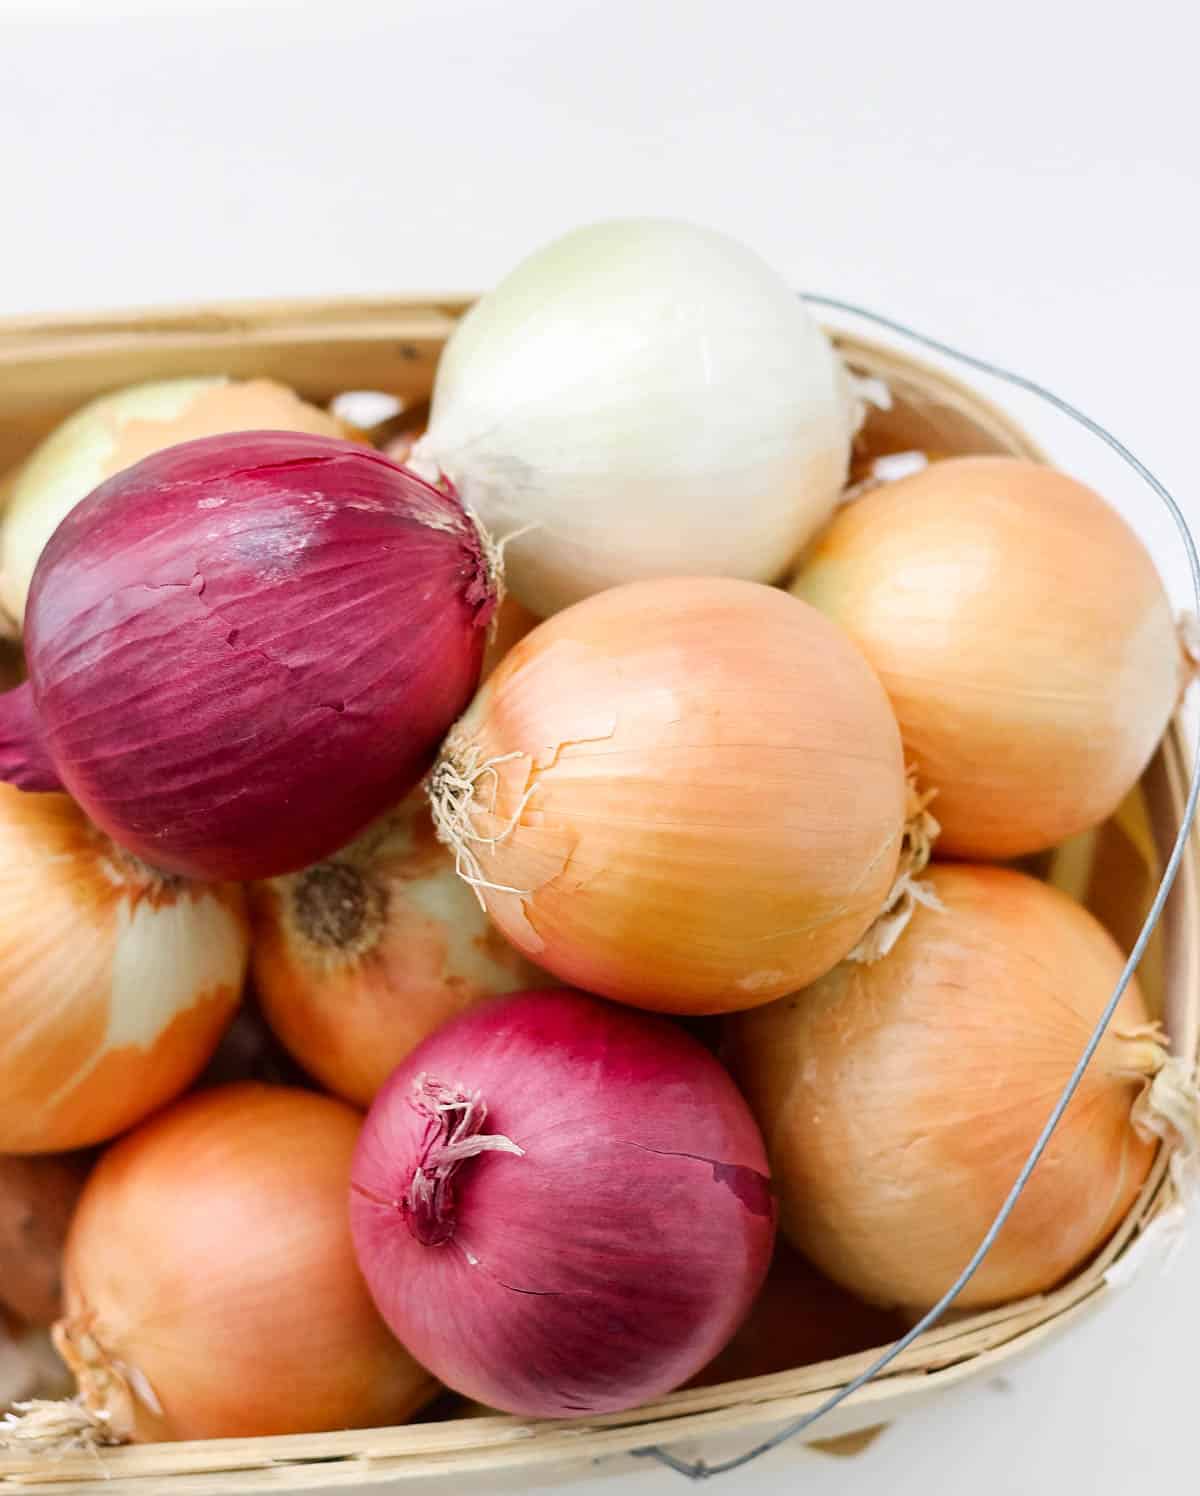 yellow, red, and white onions in a wooden basket